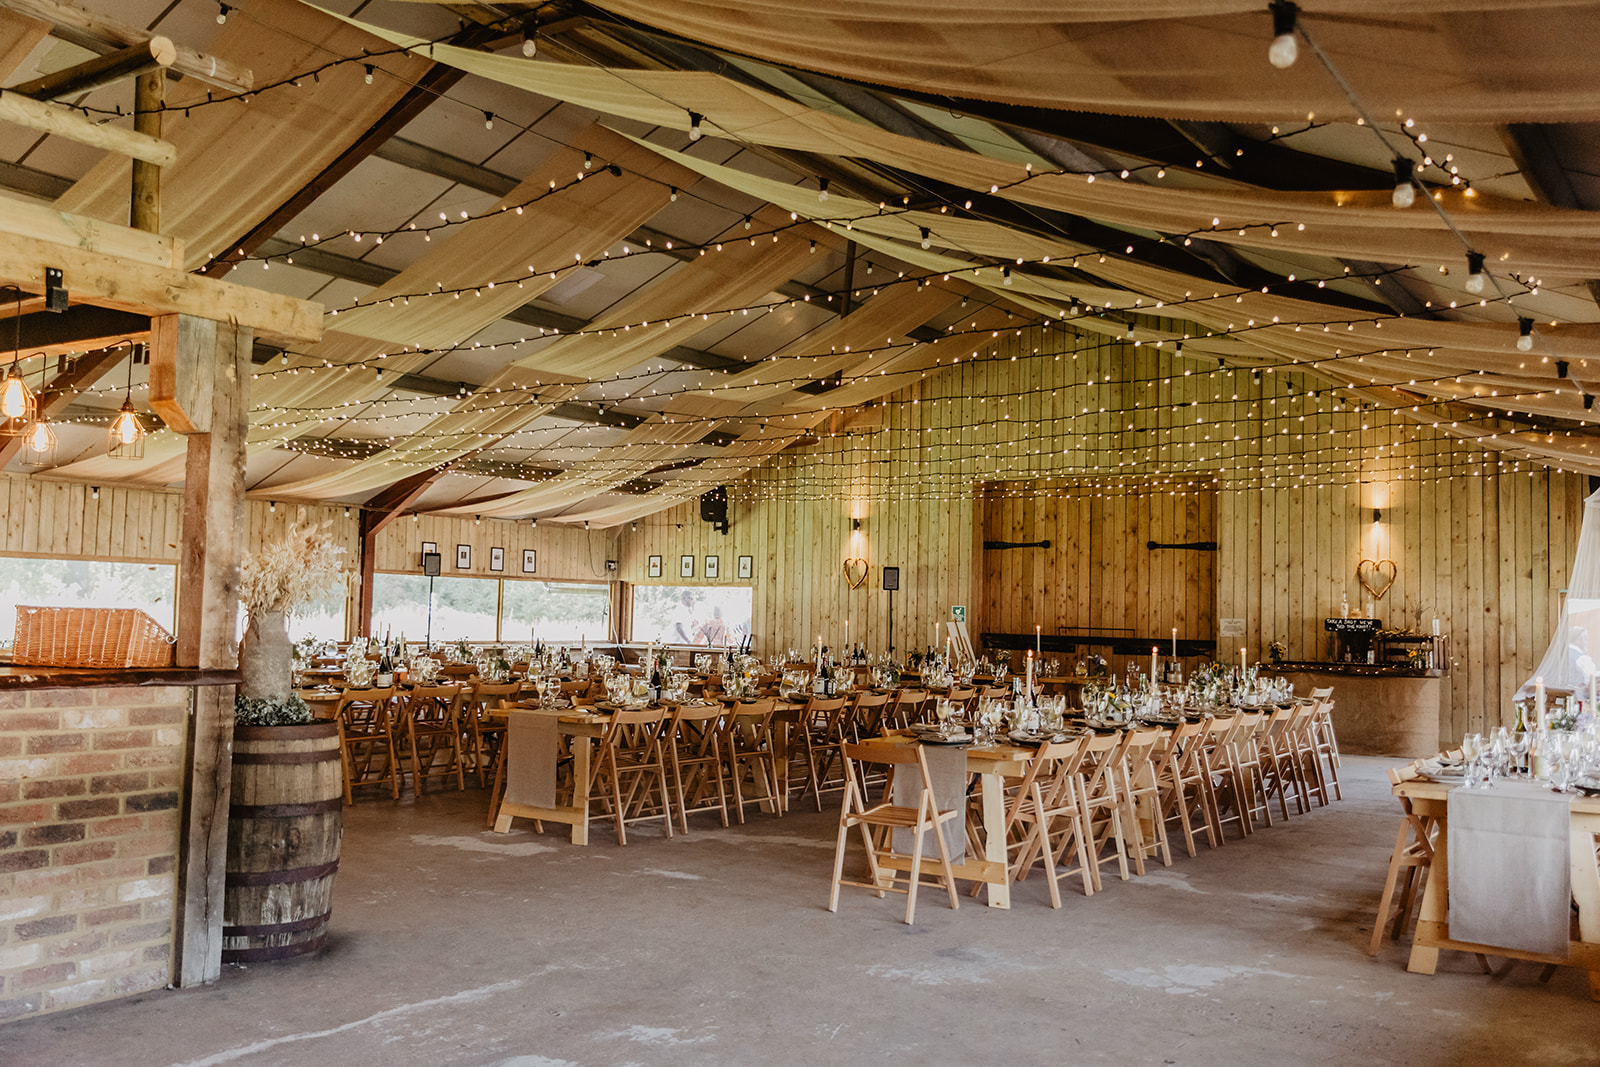 Wedding reception barn at a wedding at Mac's Farm in Sussex. By OliveJoy Photography.